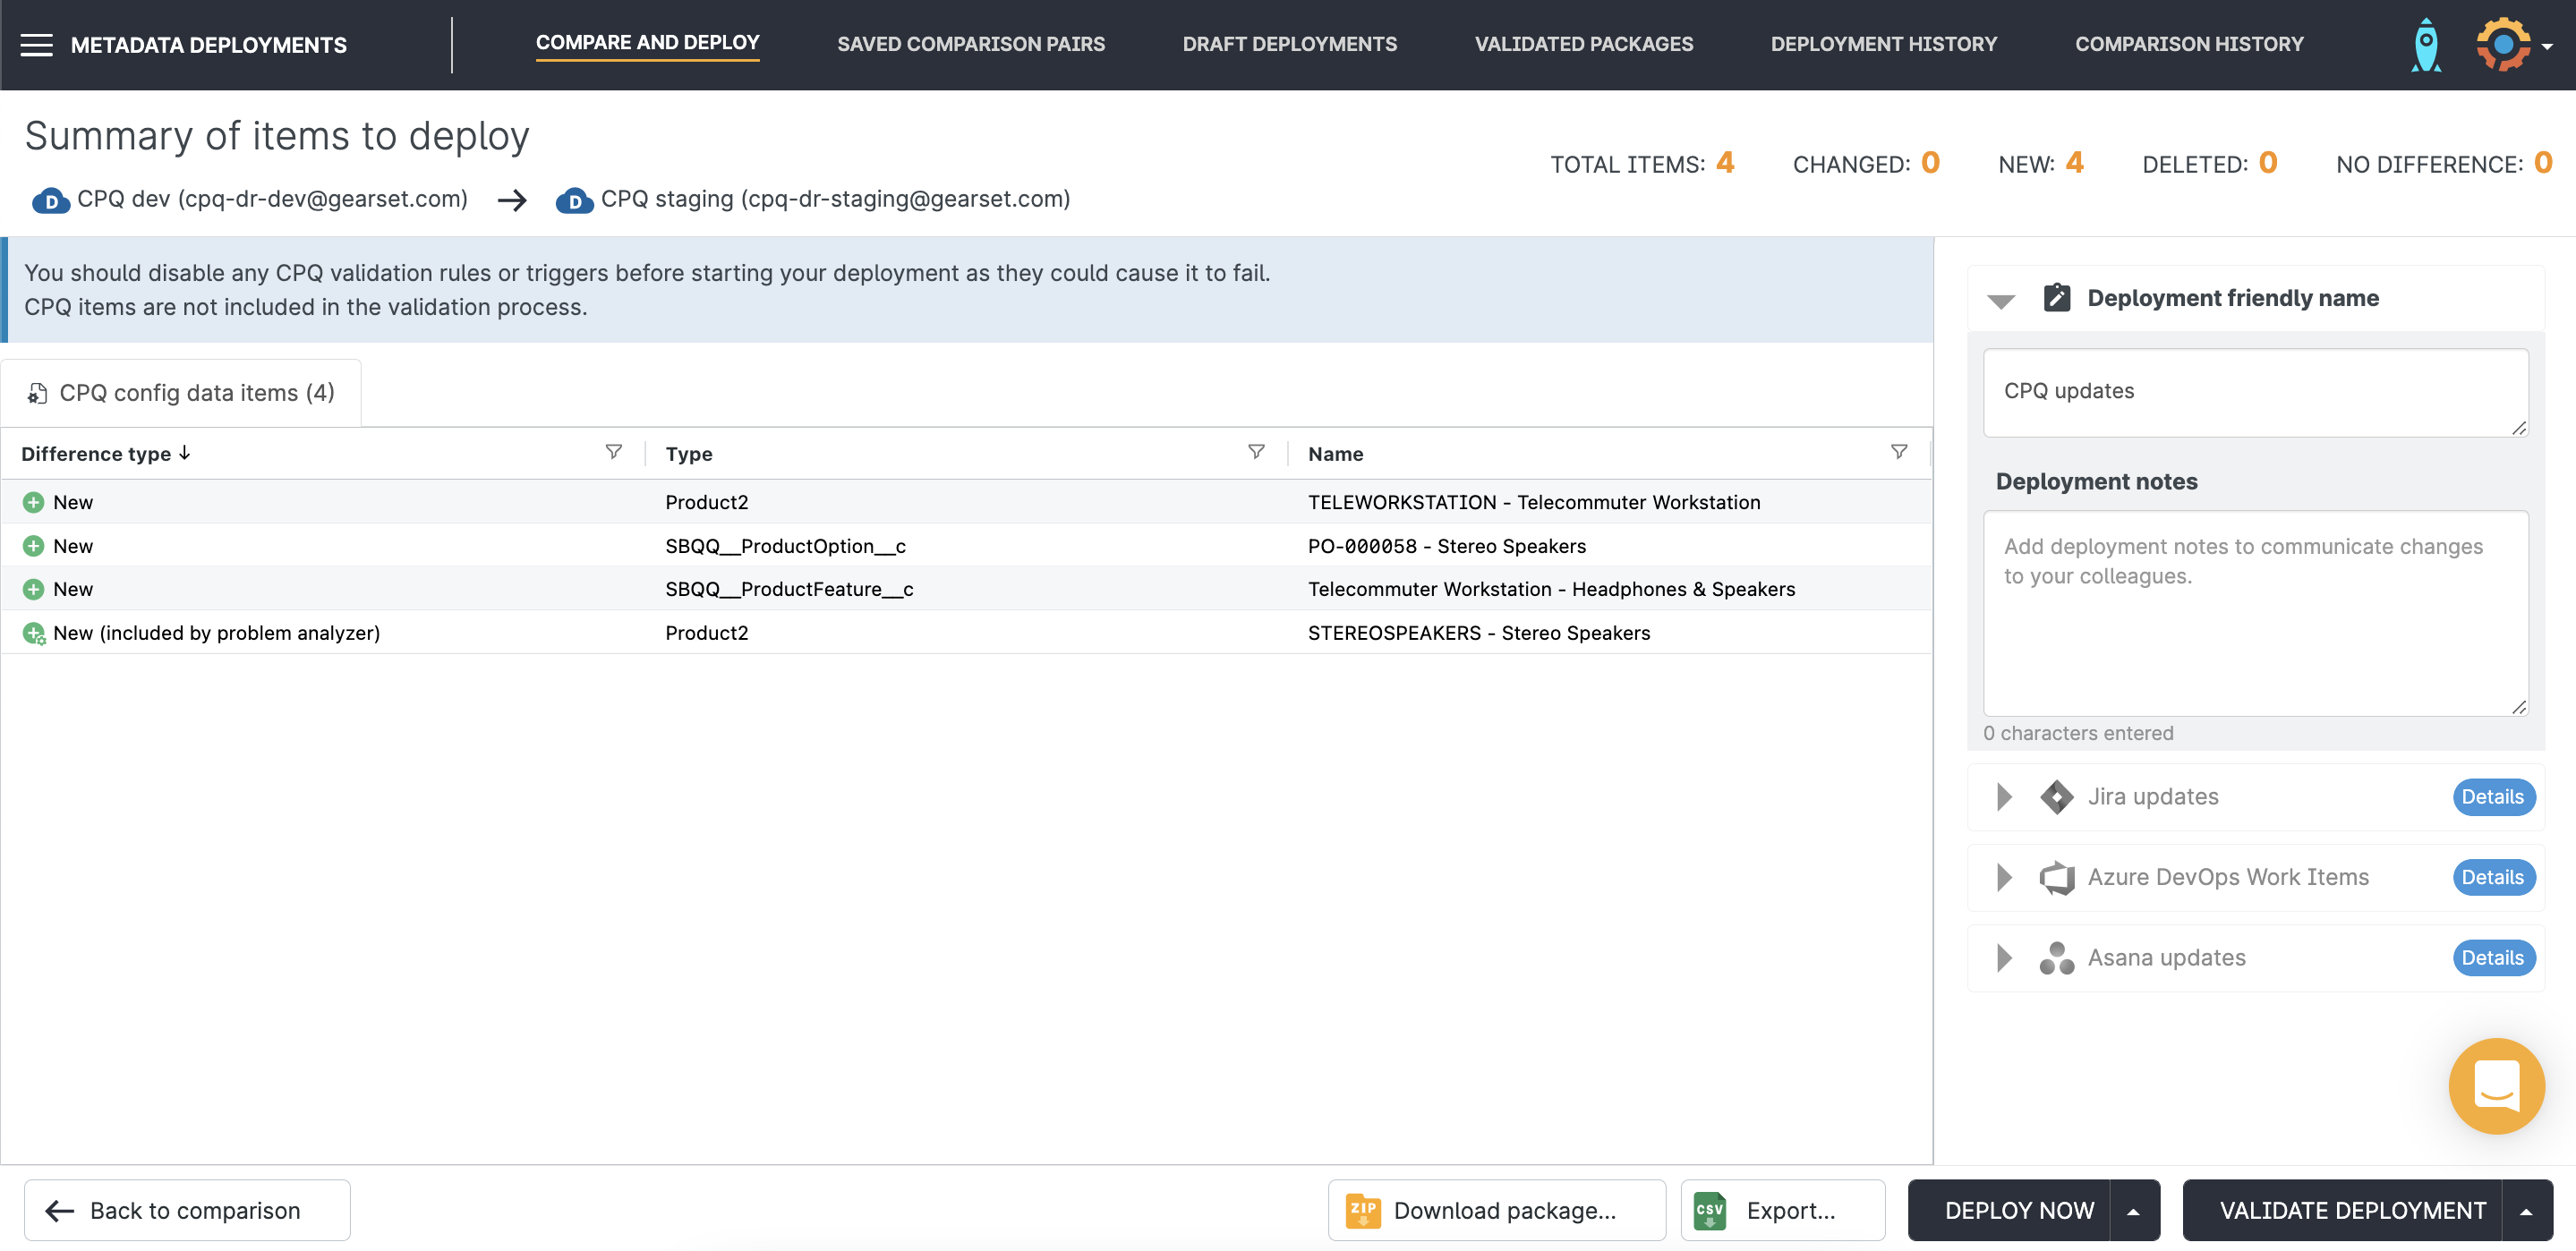 Gearset’s pre-deployment summary page shows all components included in your deployment package